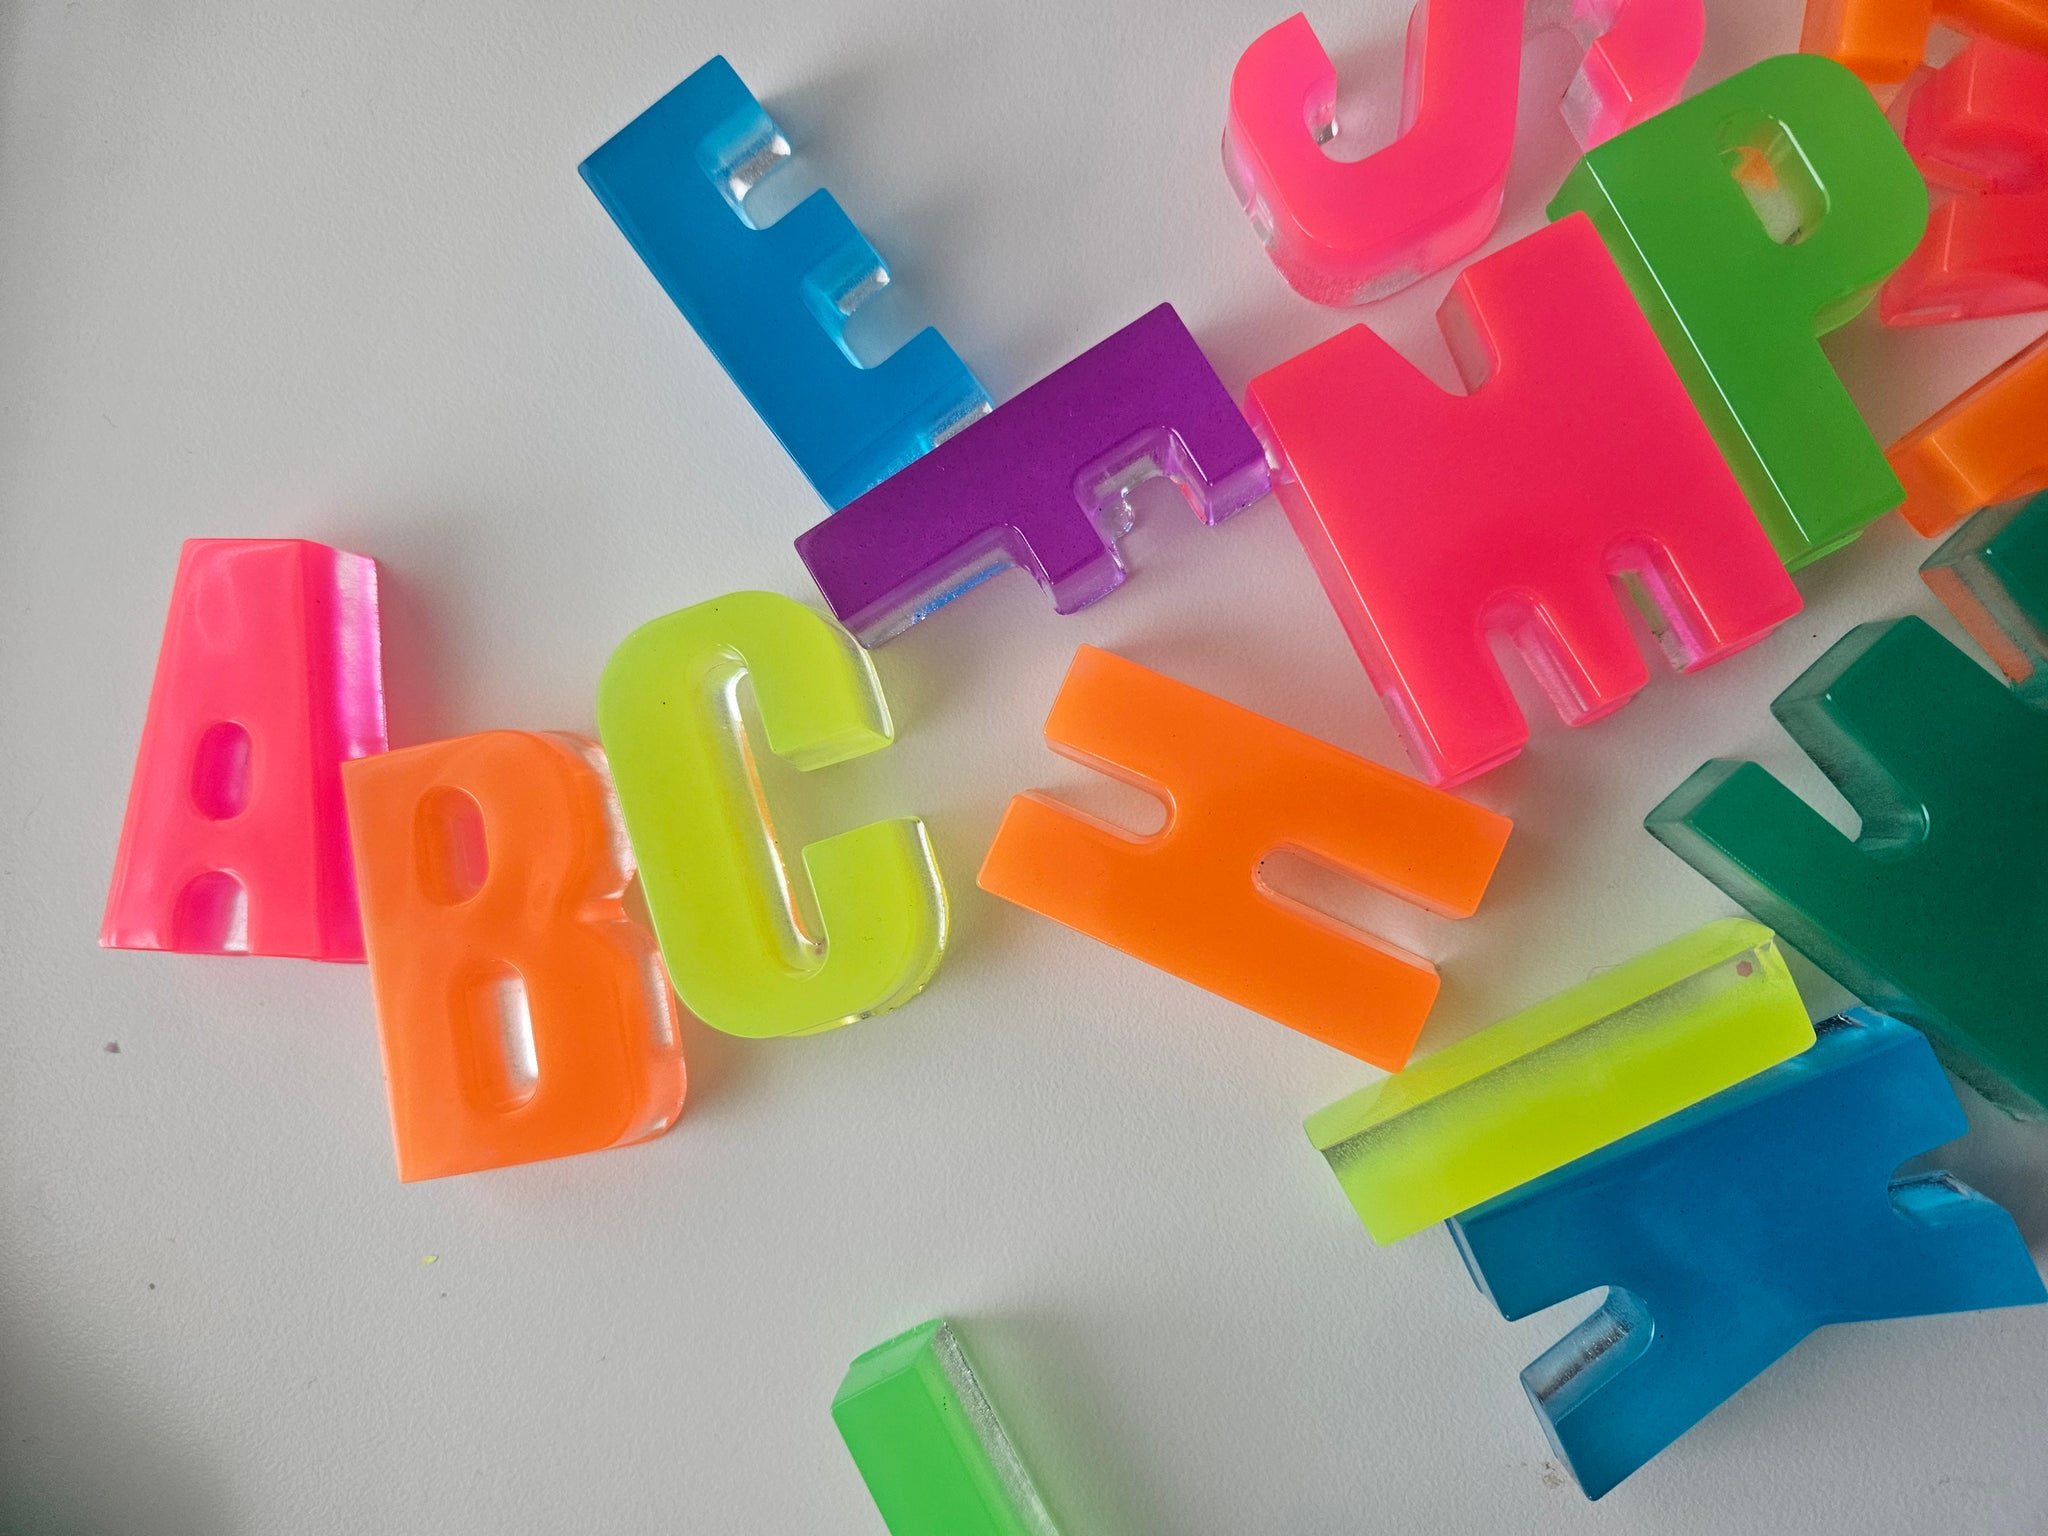 Neon "Glo" letters- Uppercase